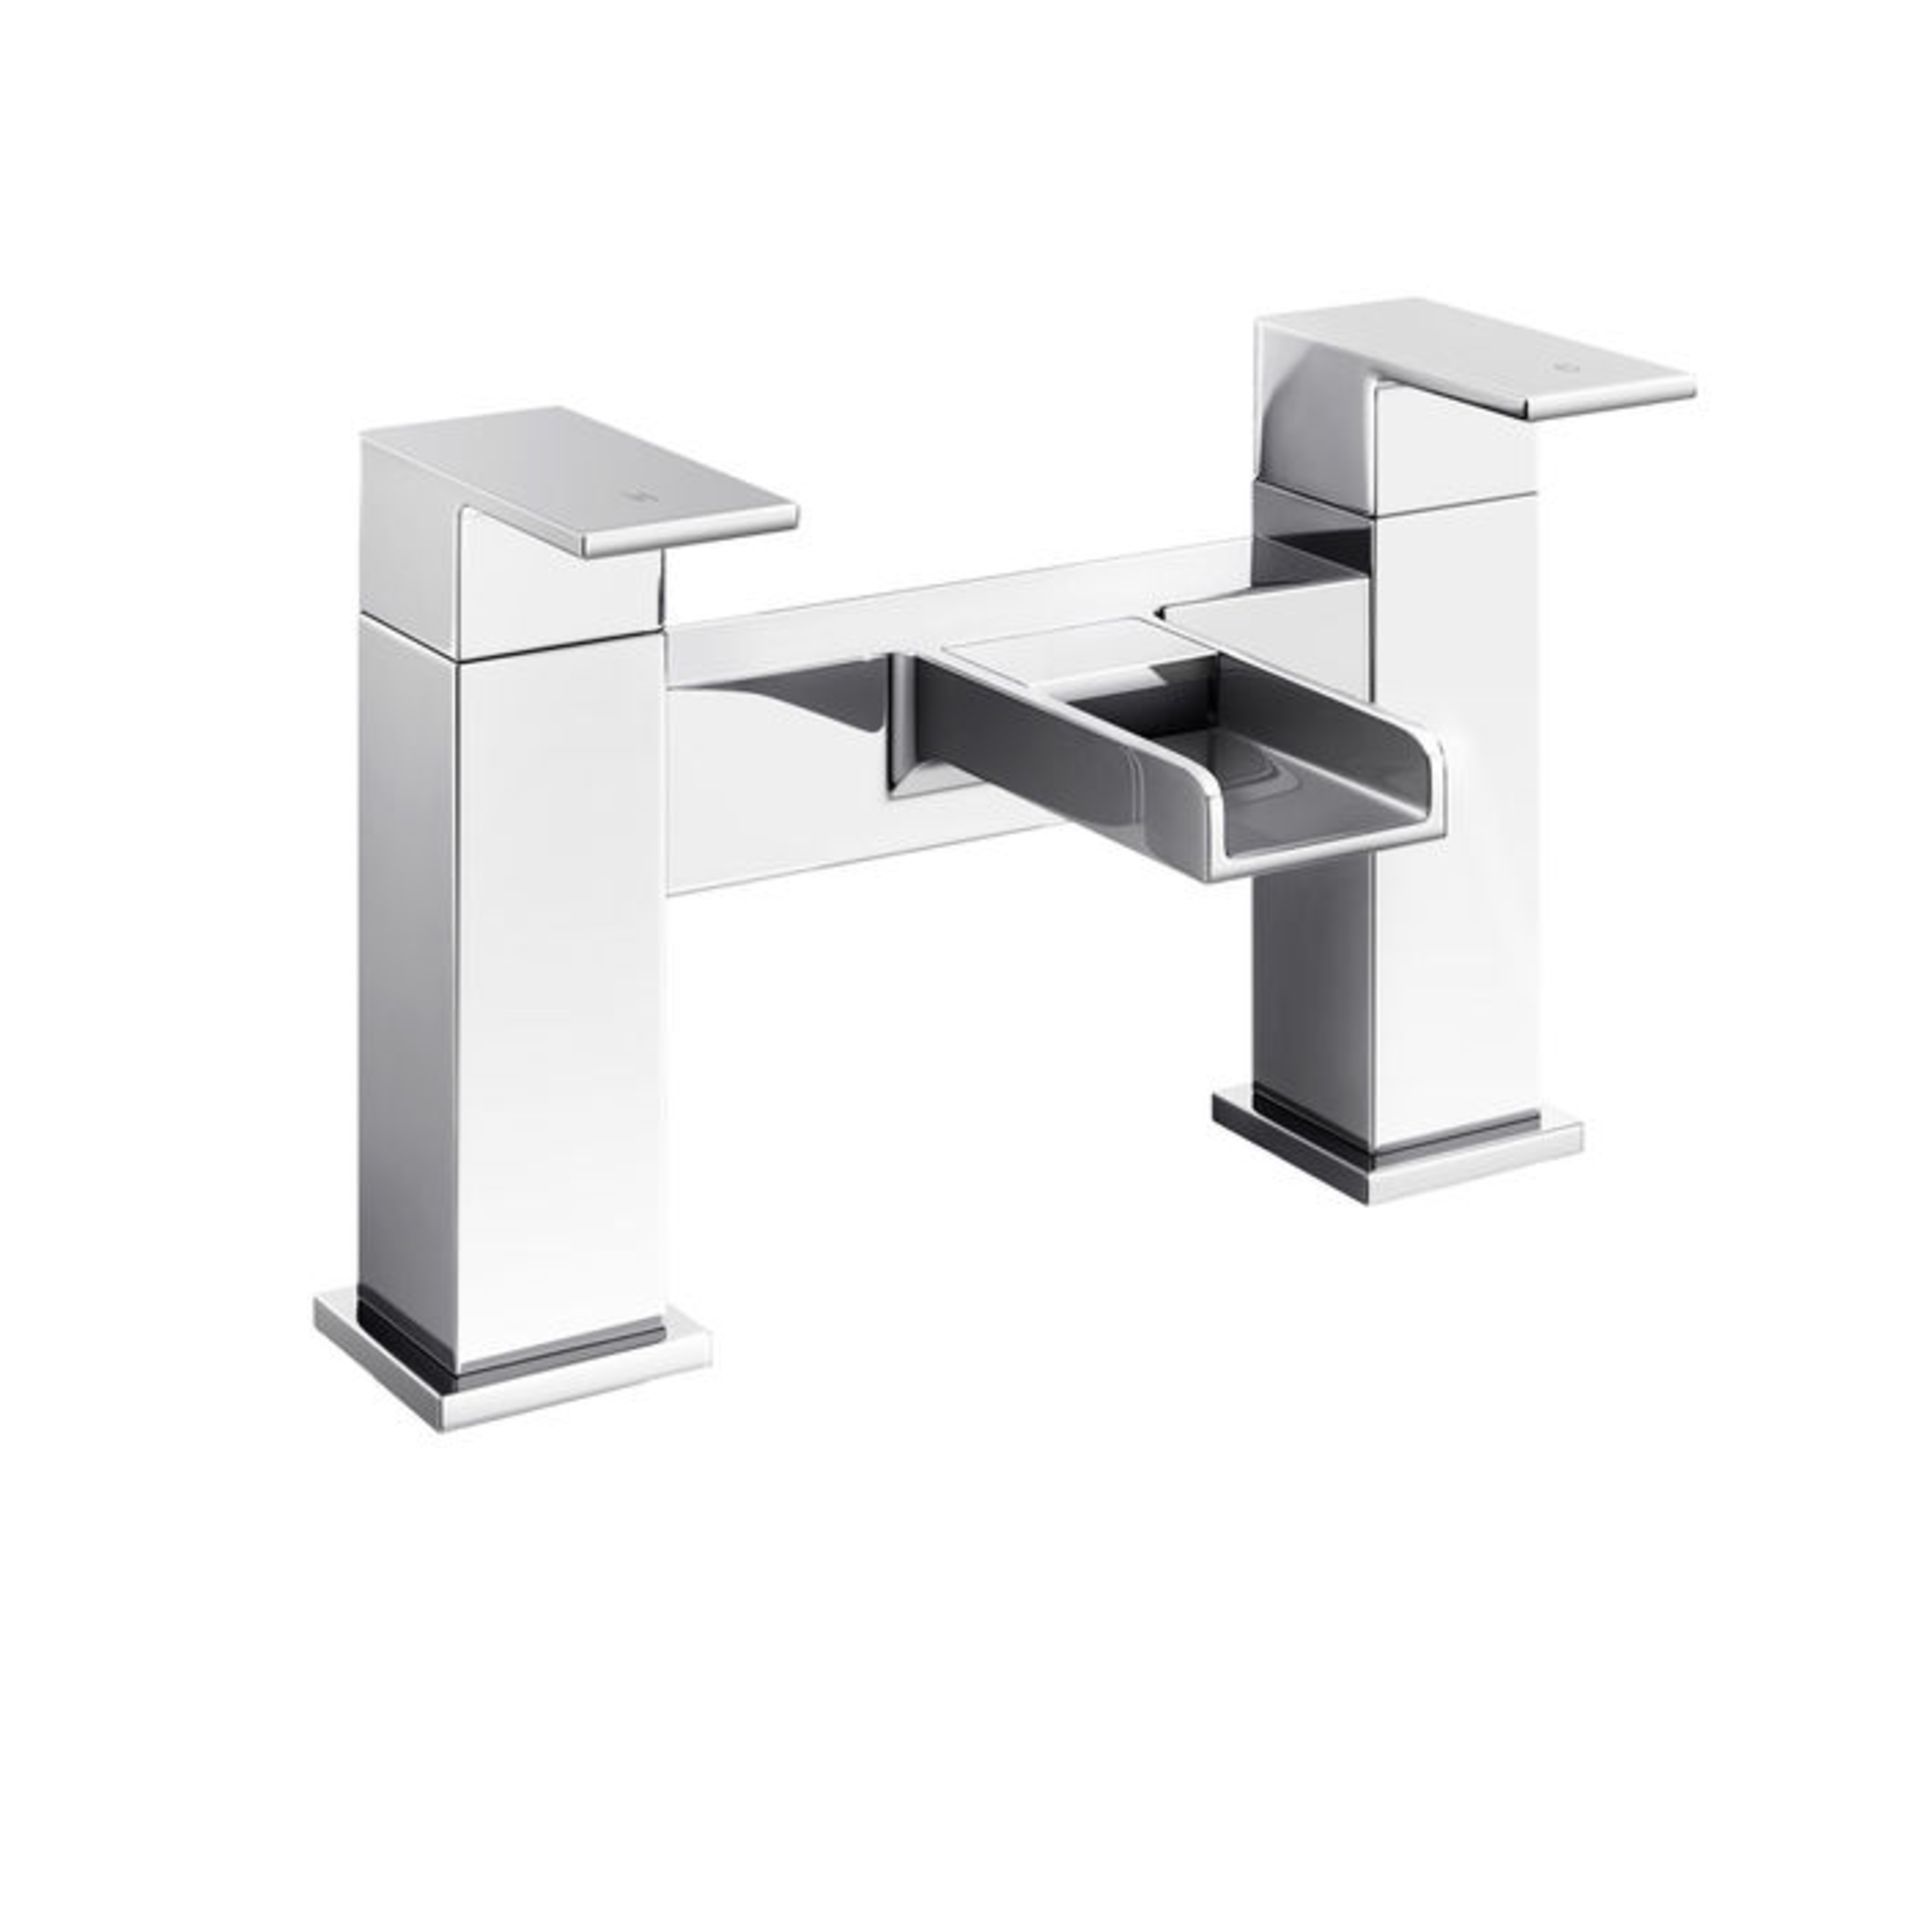 New & Boxed Niagra Waterfall Bath Mixer Taps. Tb3108.Chrome Plated Solid Brass 1/4 Turn Solid ... - Image 2 of 2